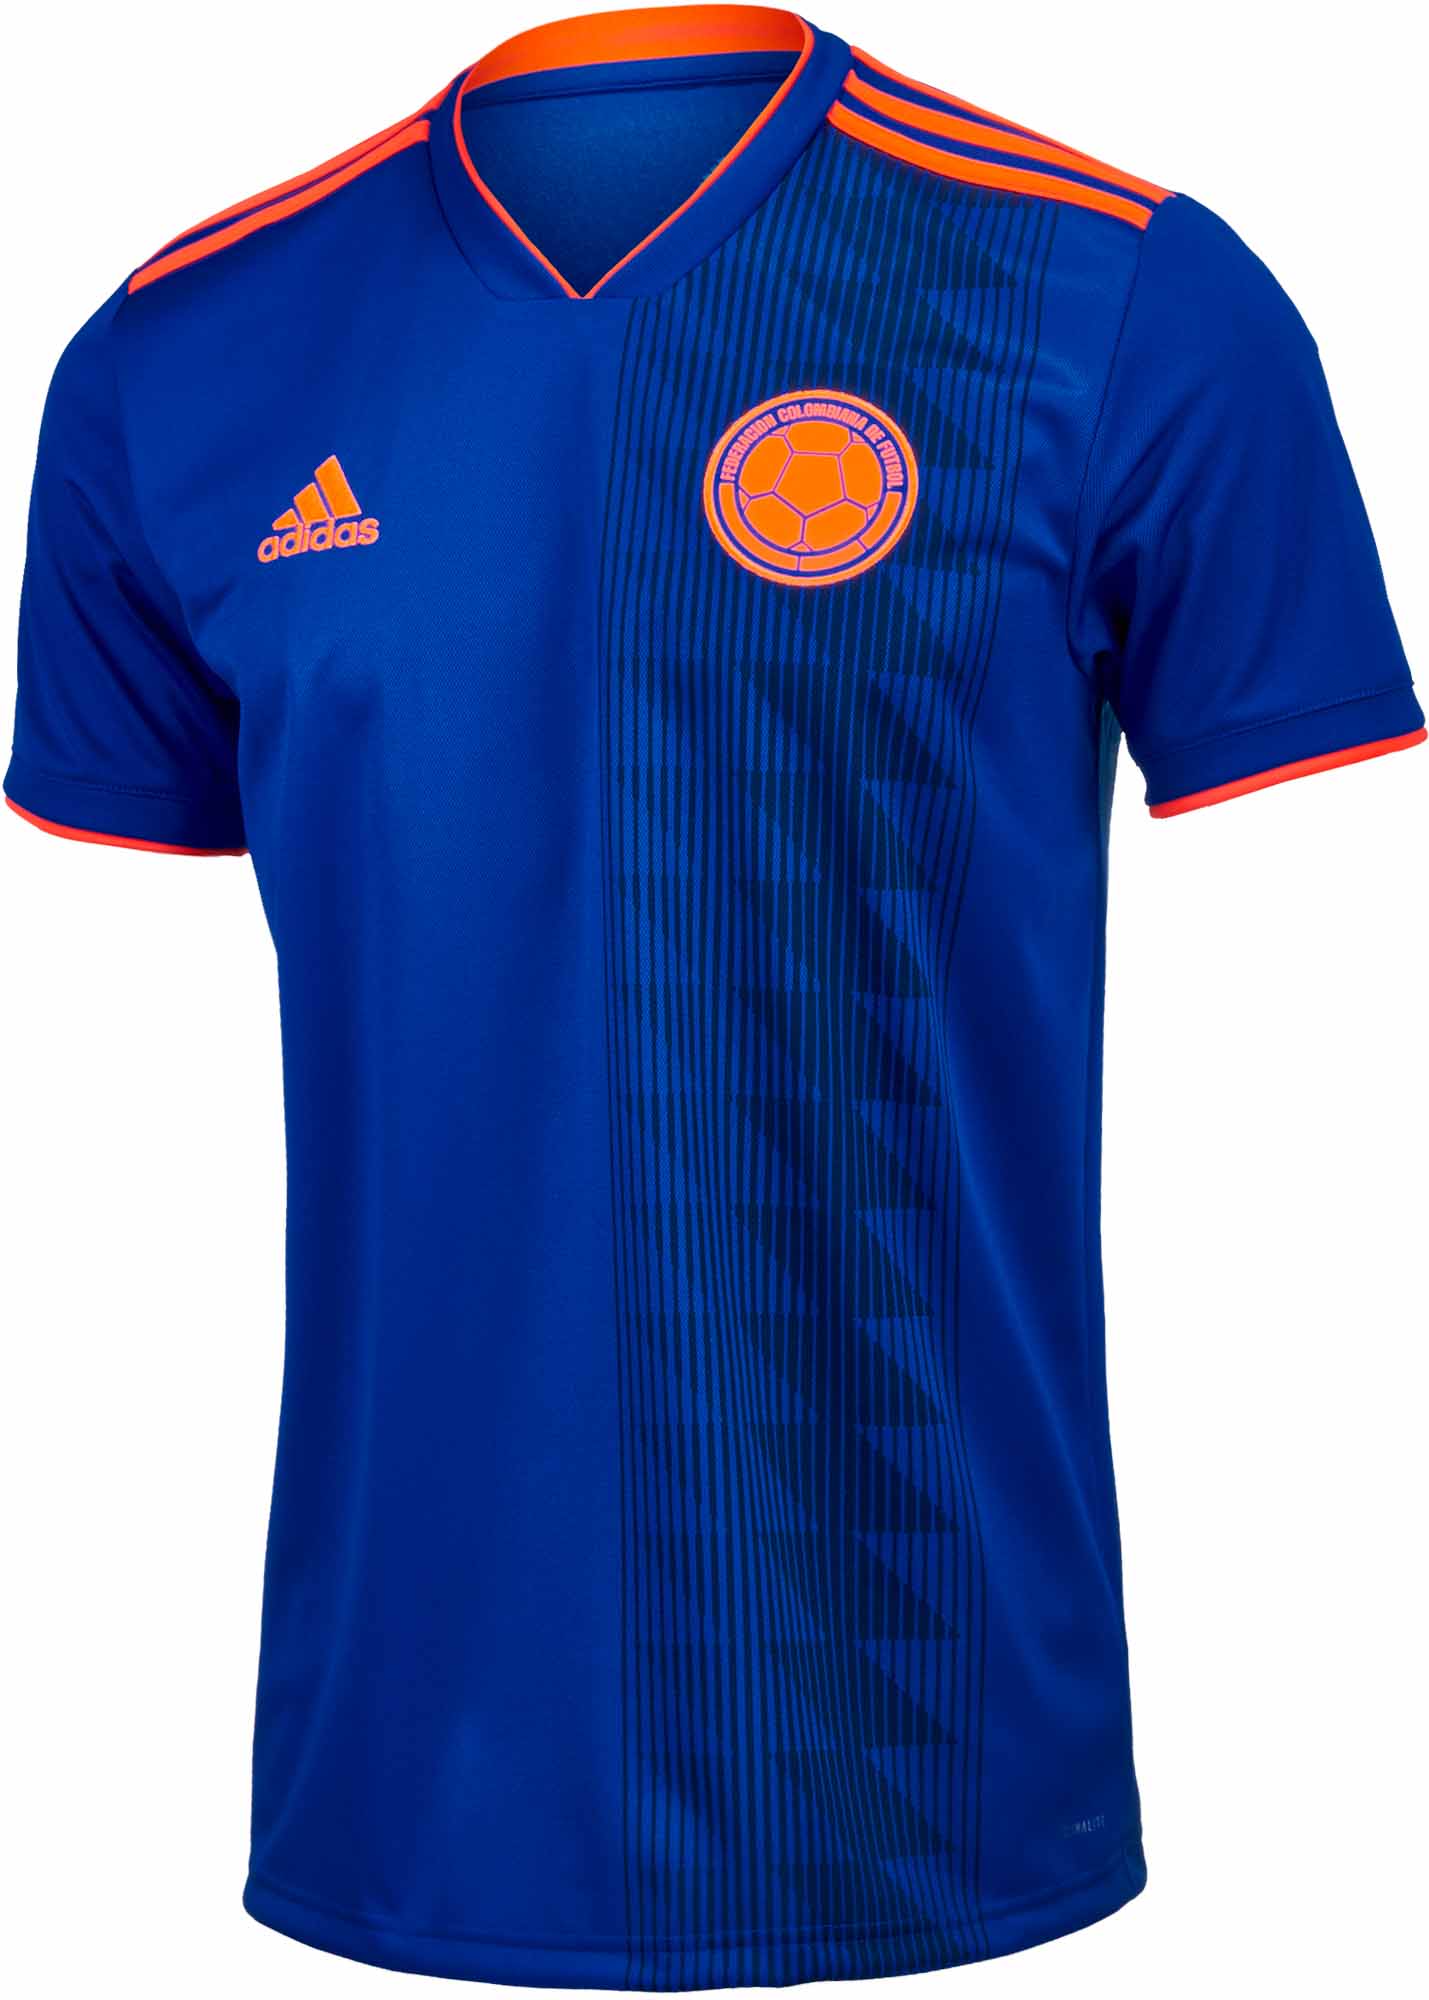 adidas Colombia Away Jersey 2018-19 